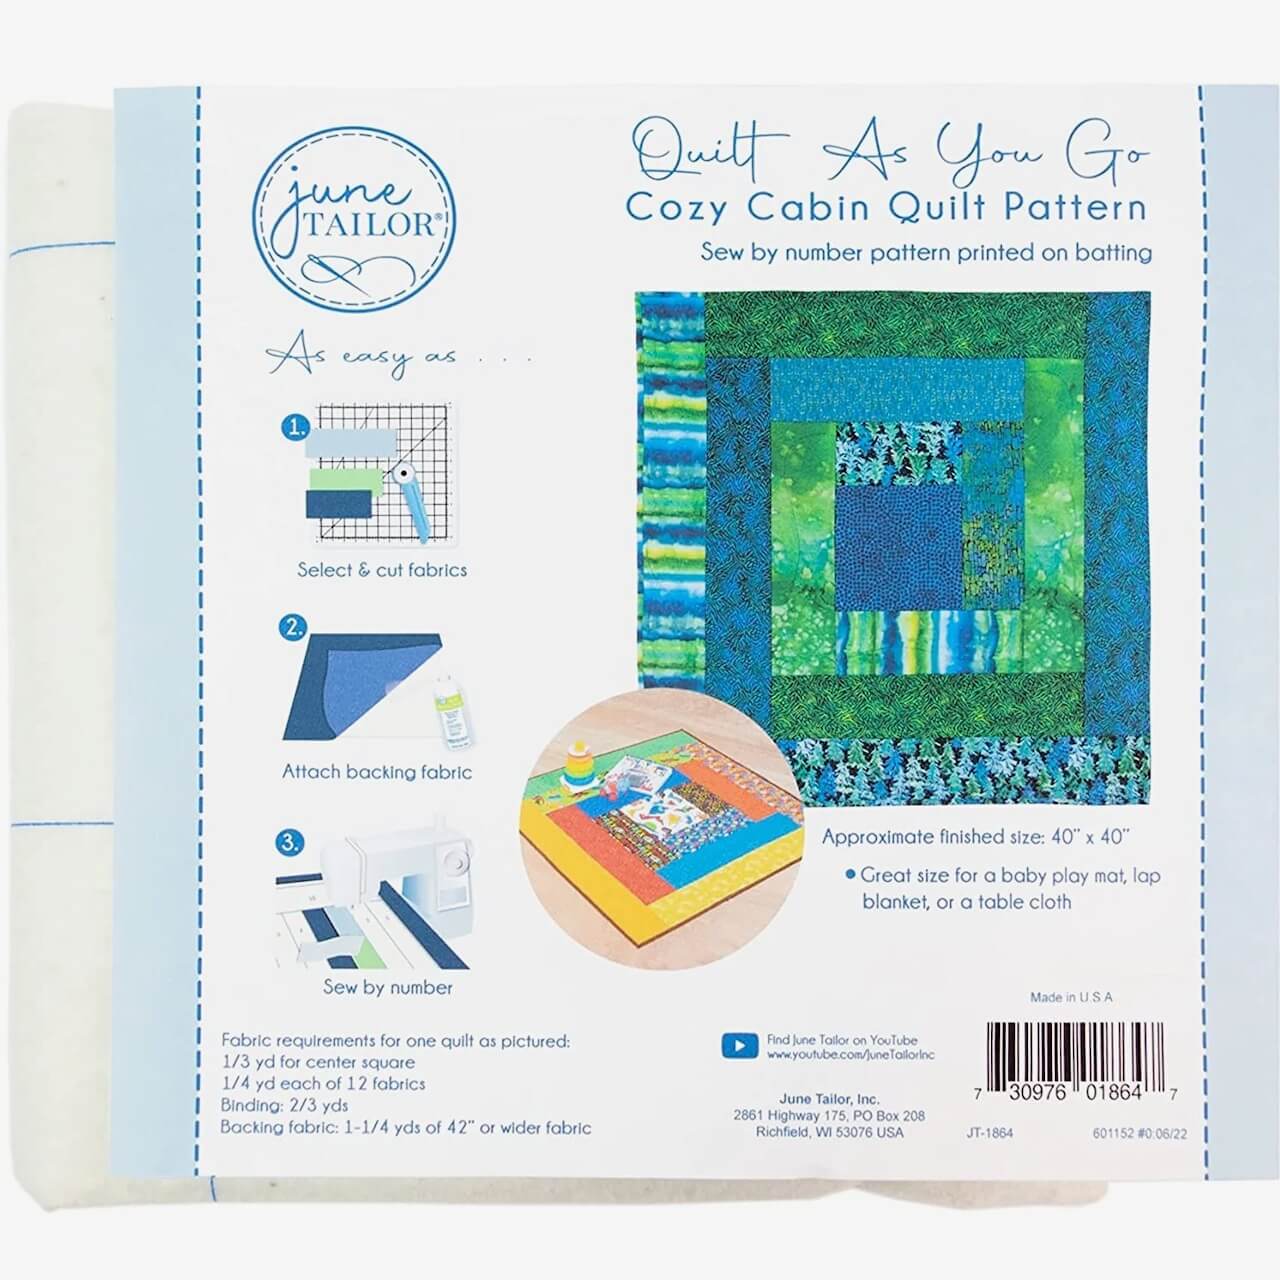 NEW! June Tailor Quilt As You Go Designs Now Available at Nancy Zieman Productions at ShopNZP.com